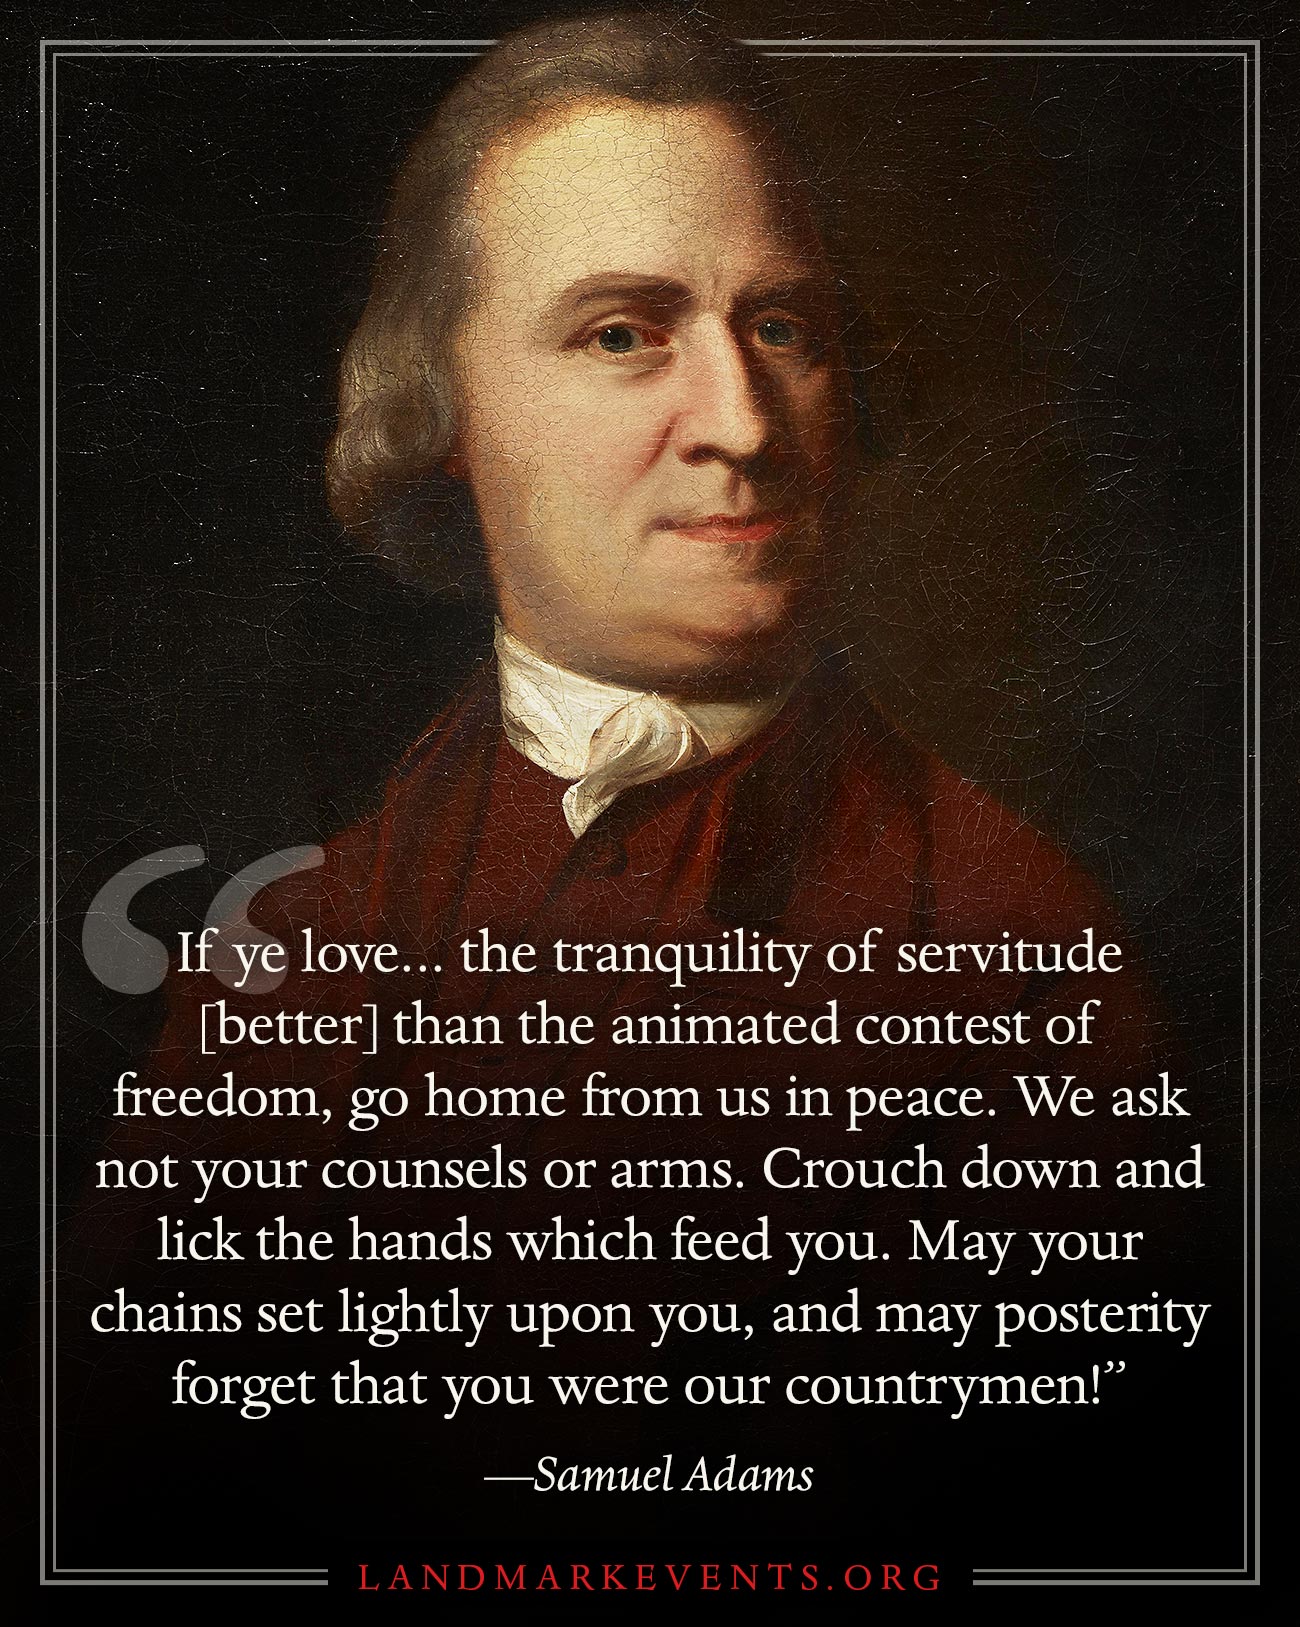 Voices from the Past - Samuel Adams on Servitude vs. Freedom